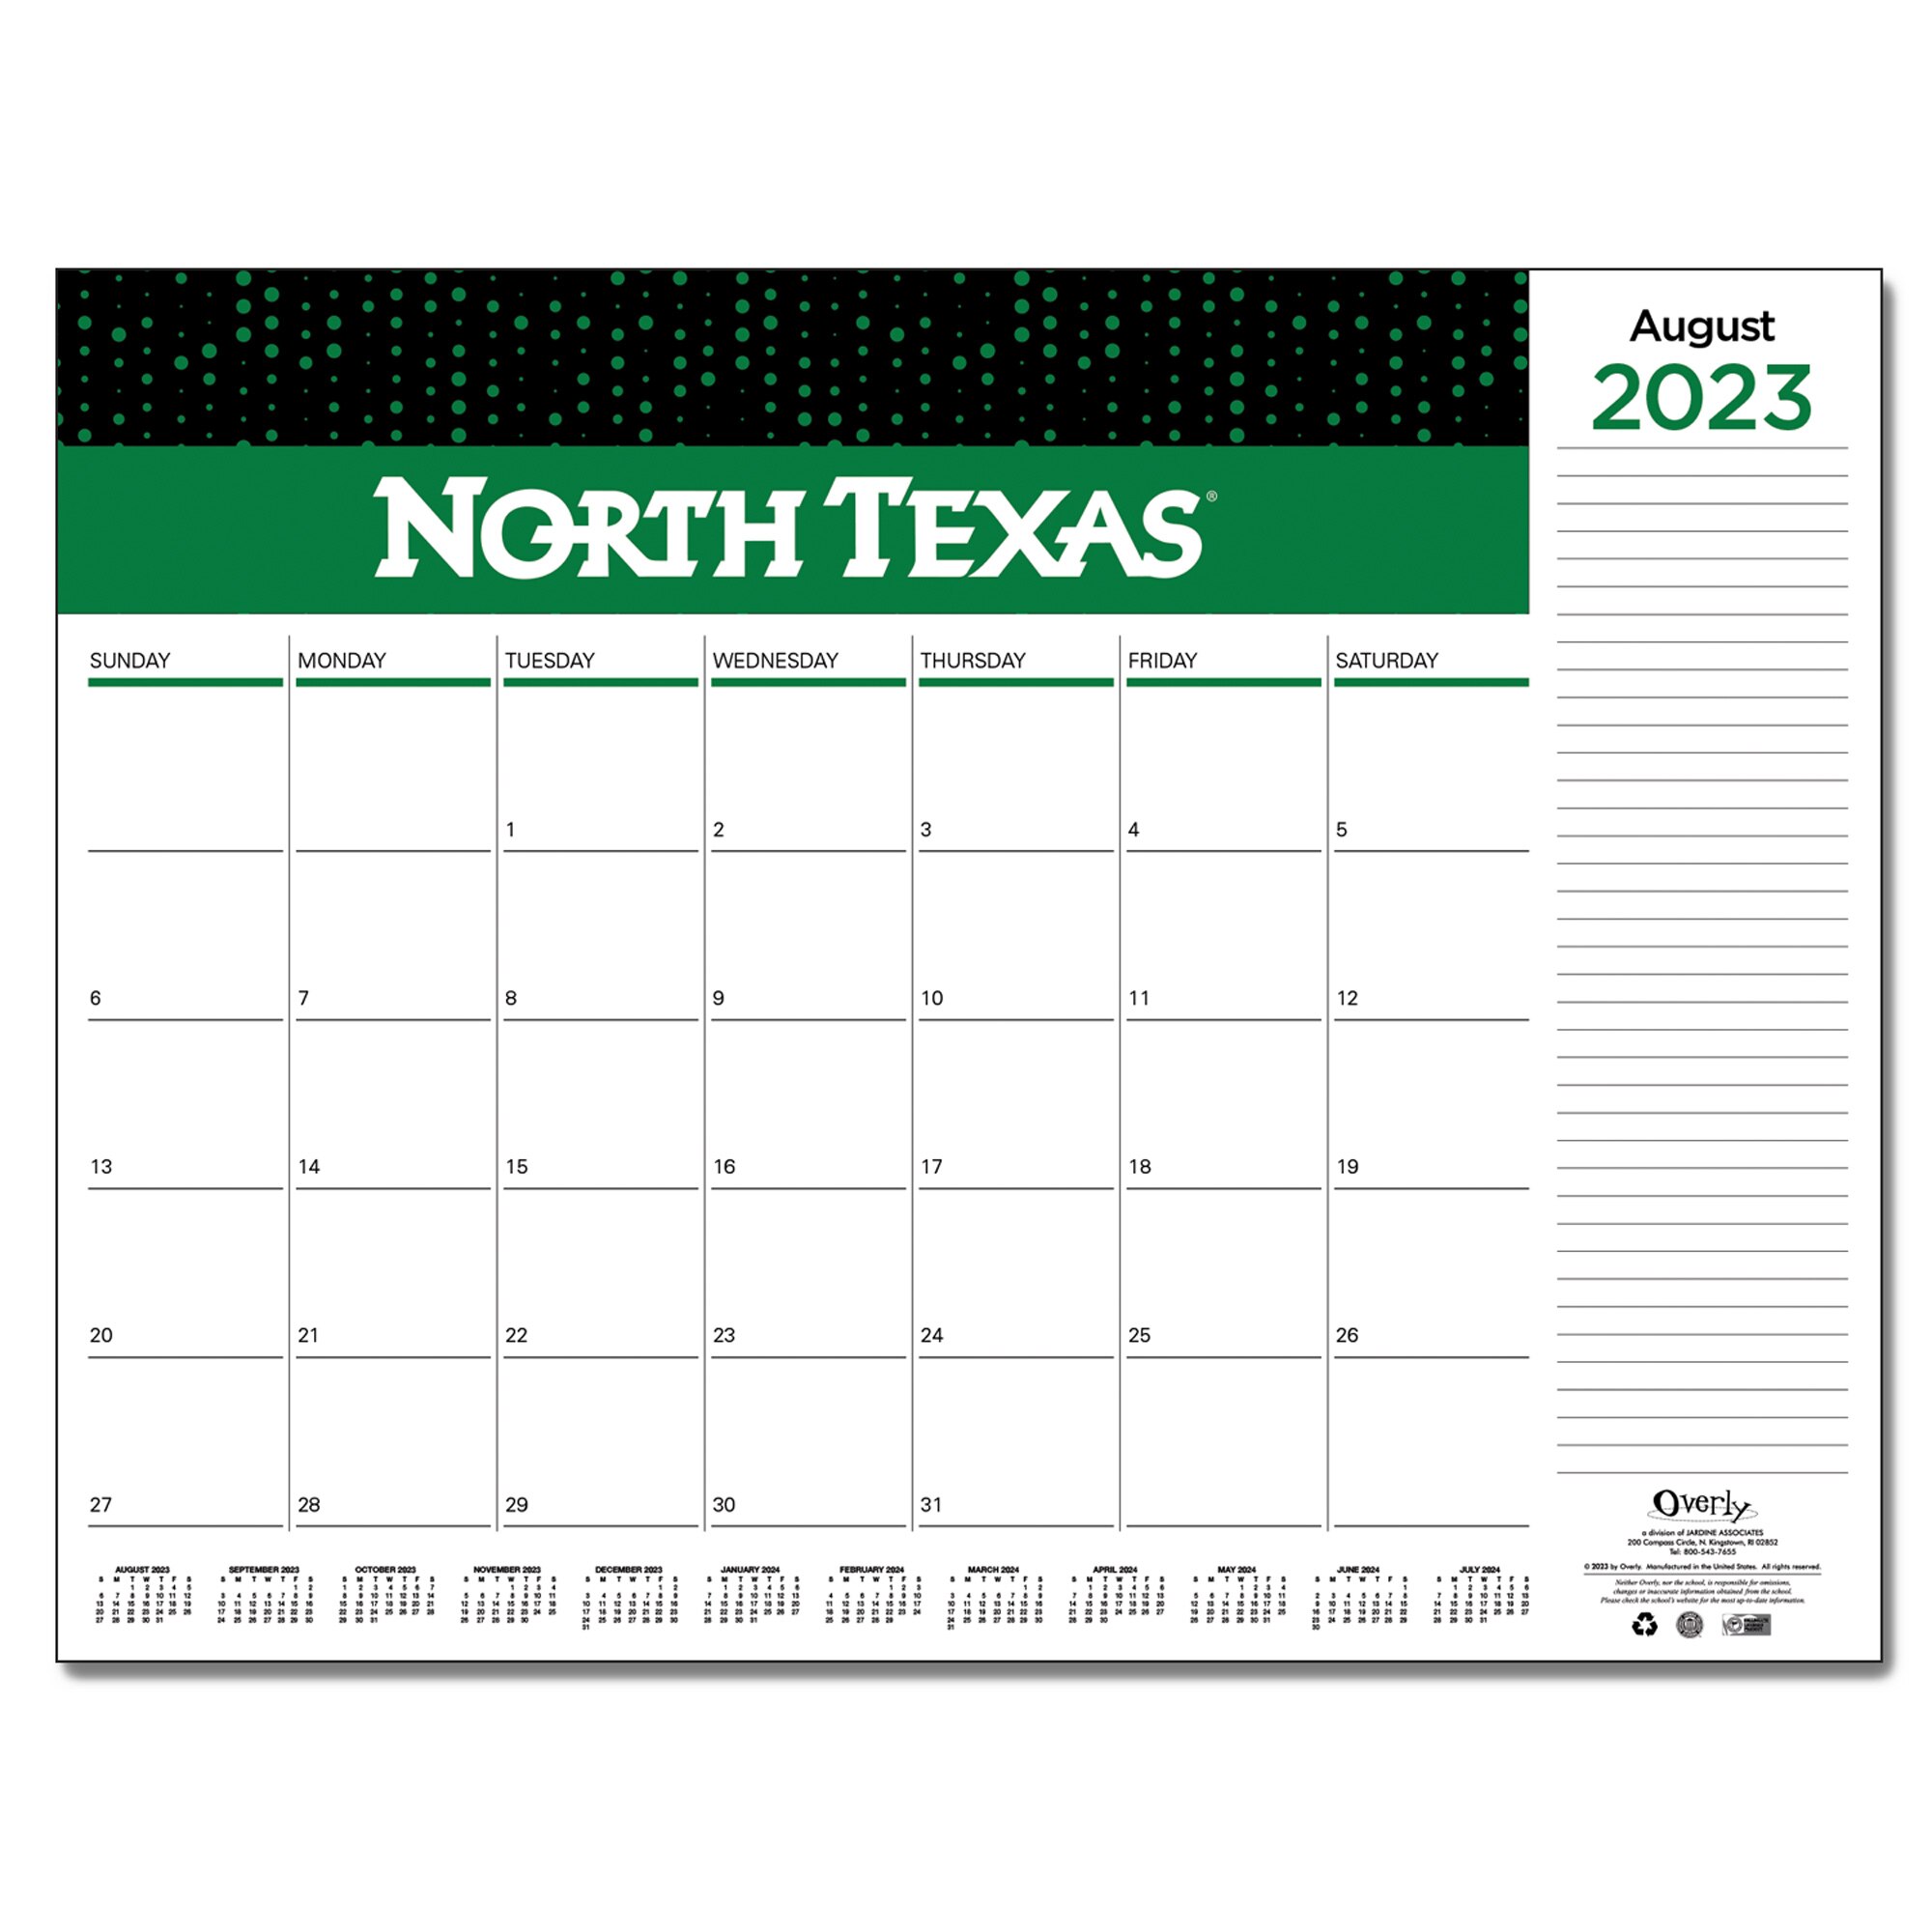 BY 24 Spirit Soft Touch Foil - Wordmark Imprinted Planner 23-24 AY 7x9